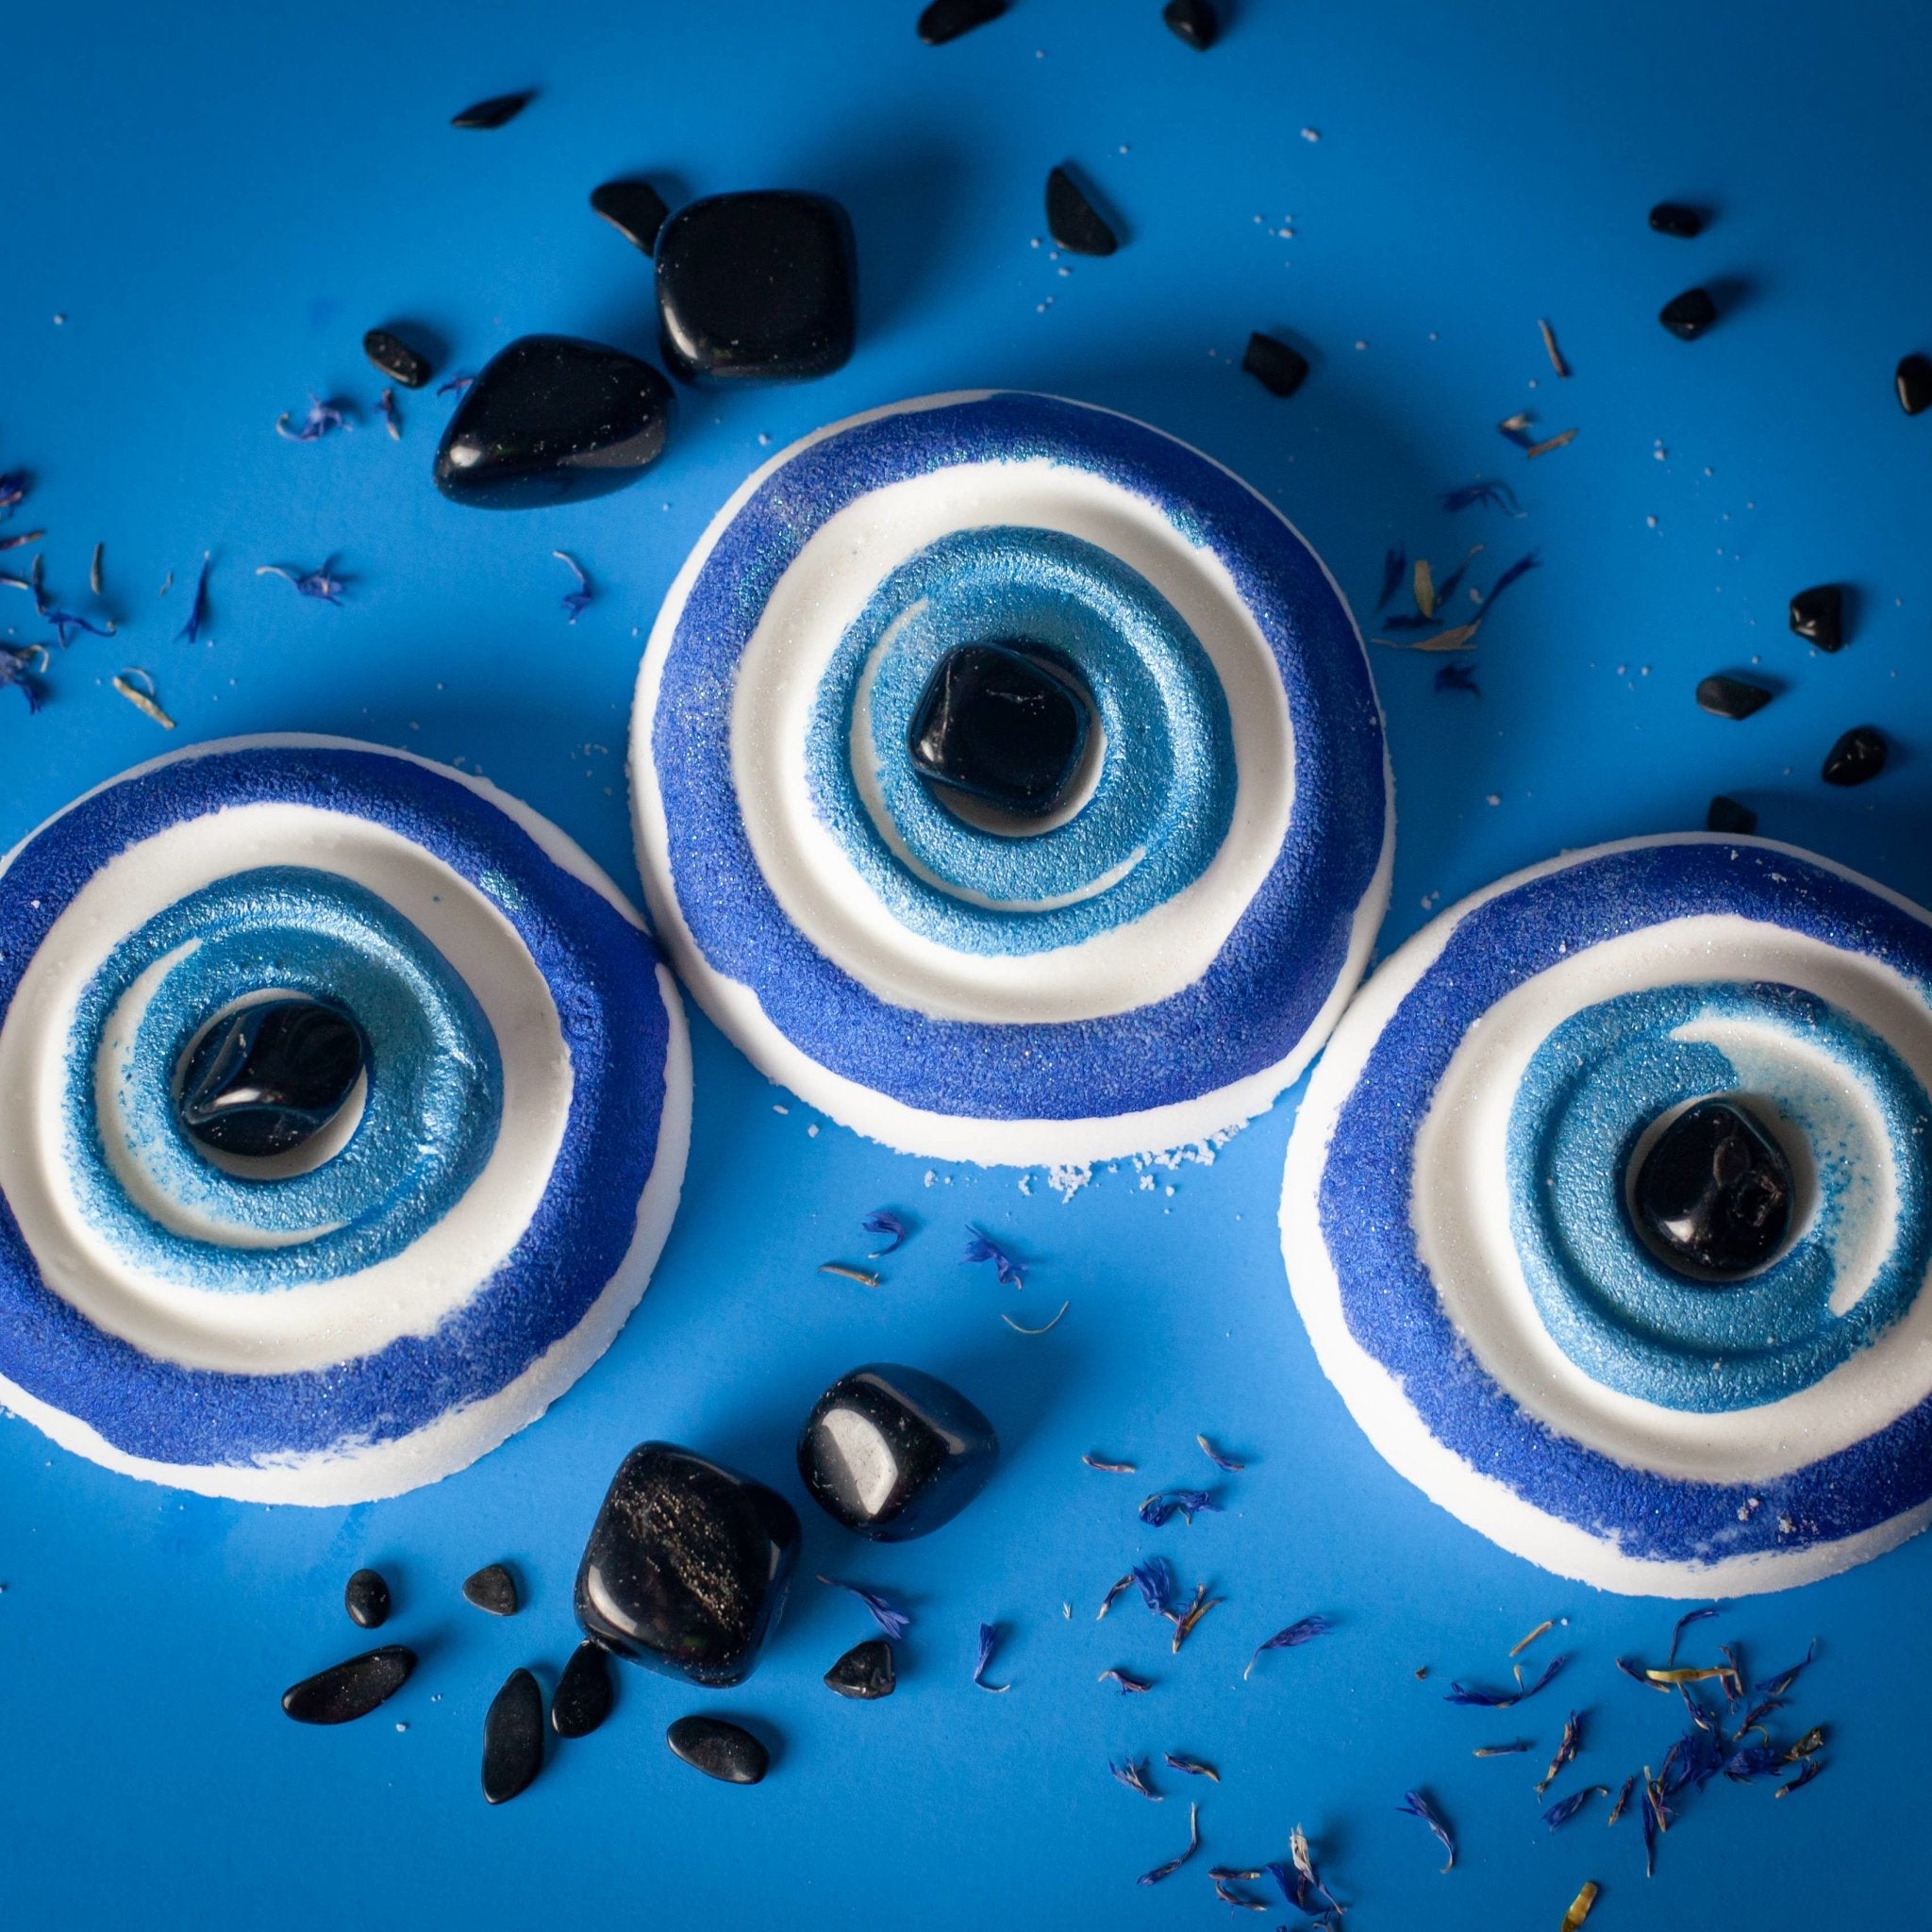 Evil Eye Protection Bath Bomb - Obsidian Crystal - The Gilded Witch